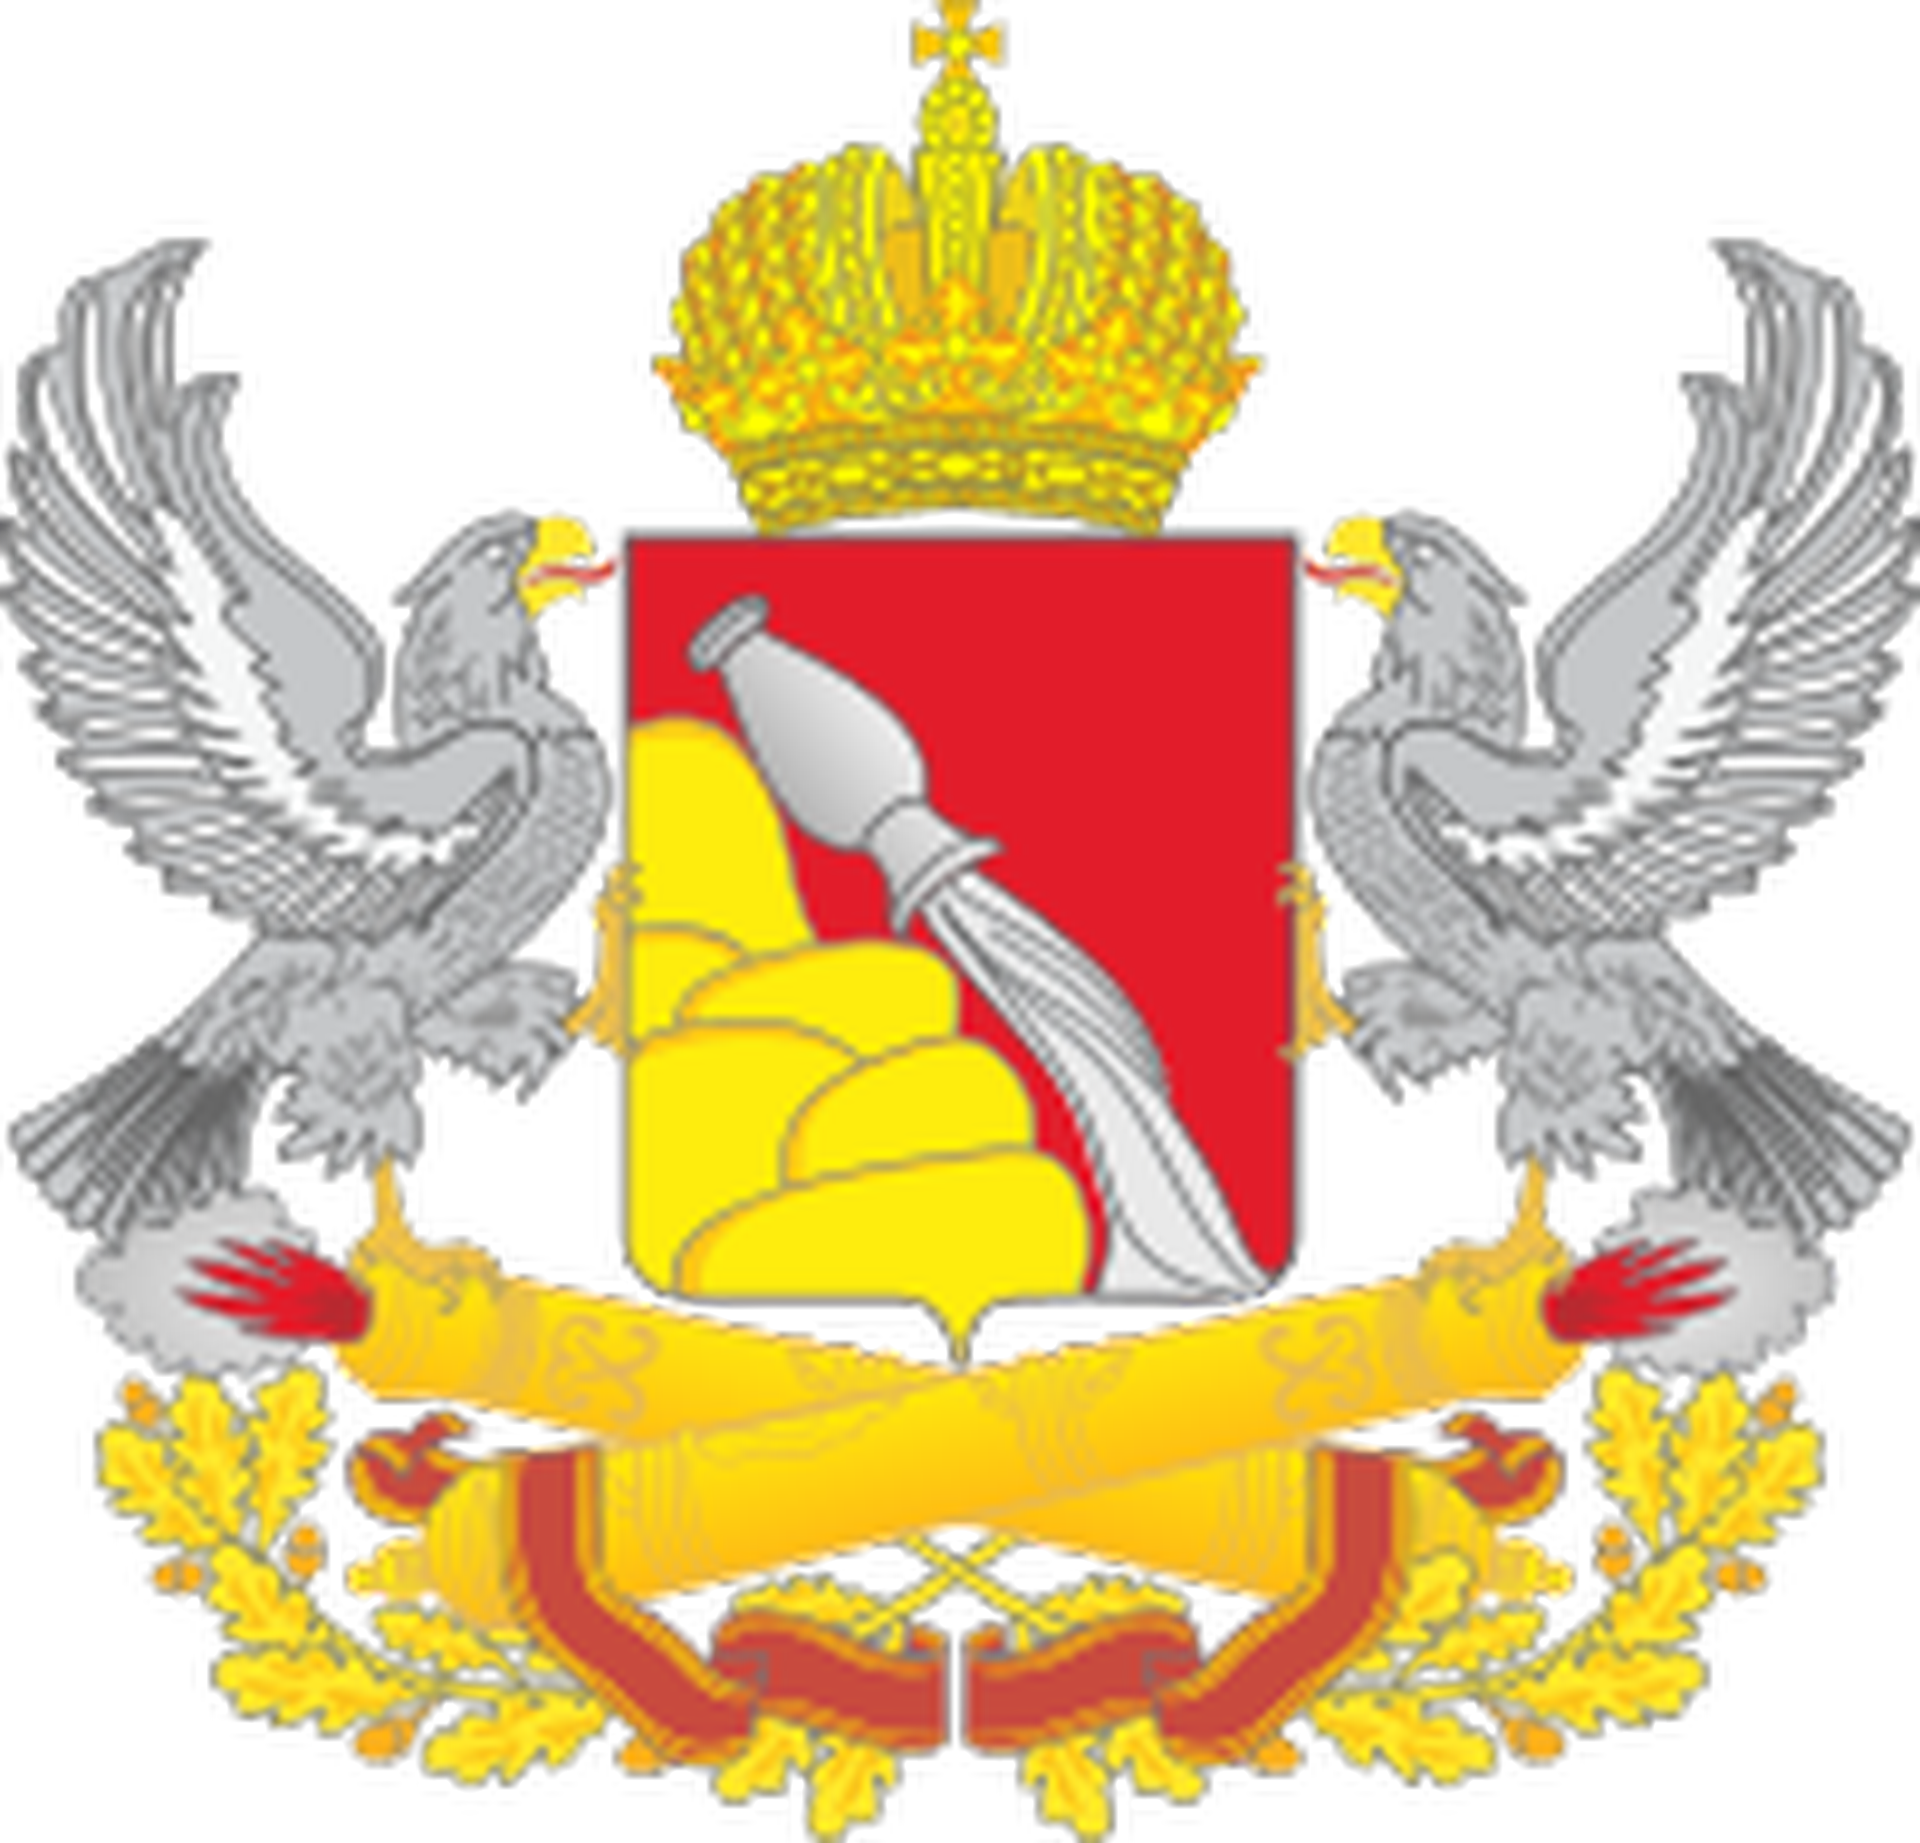 200px-Coat_of_arms_of_Voronezh_Oblast.svg